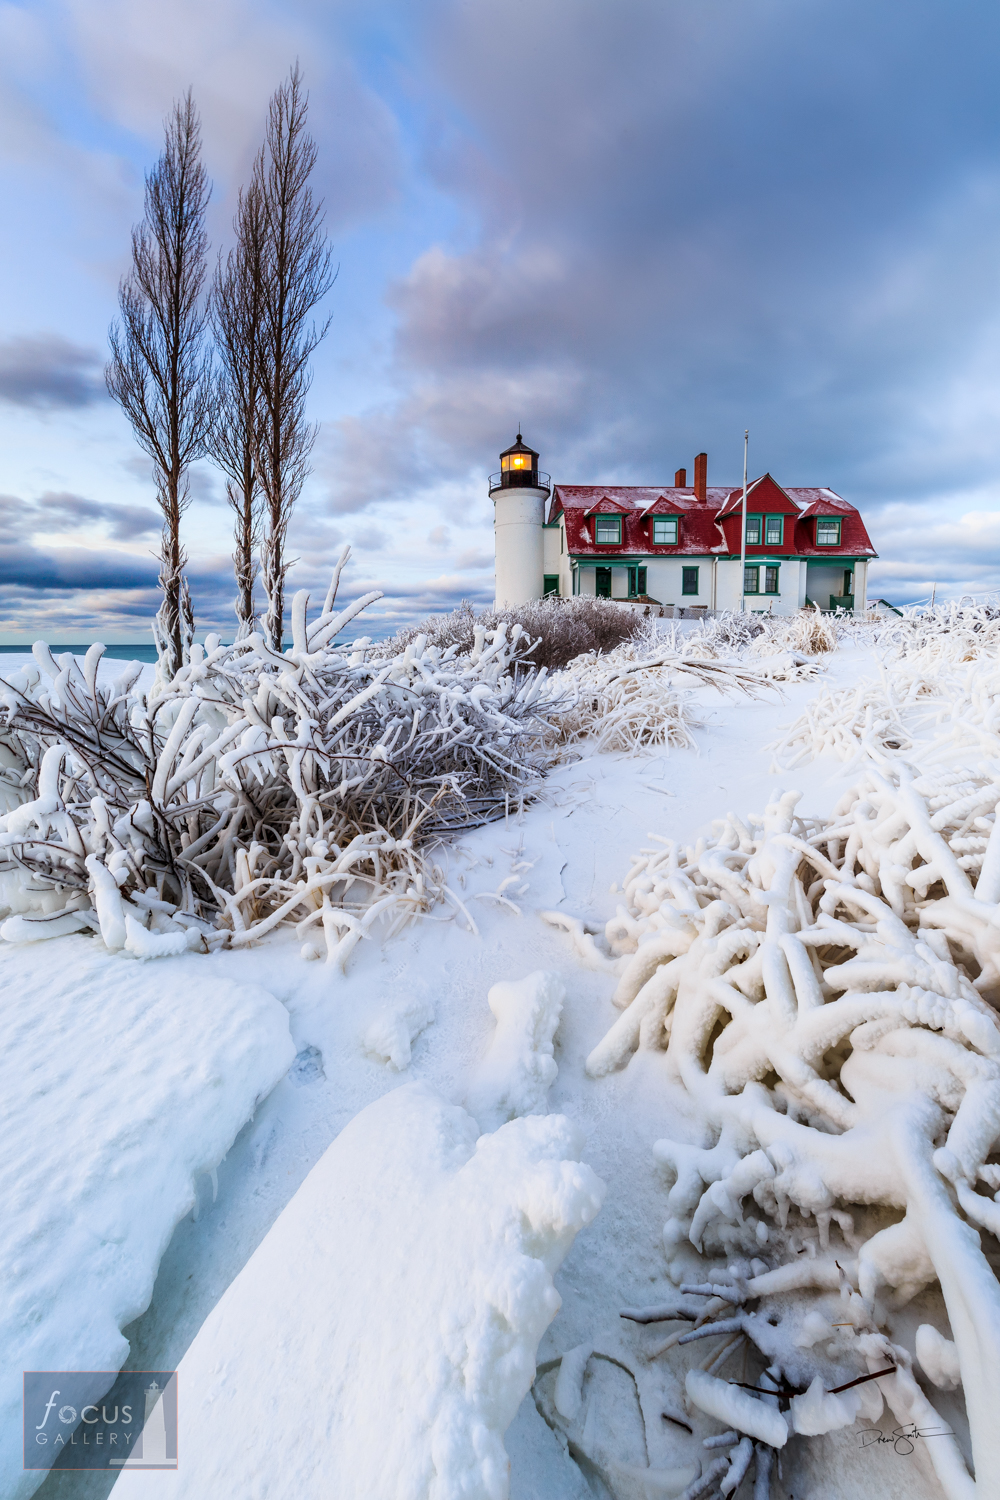 Winter   snow and ice coat the bushes and beach at Point Betsie Lighthouse.